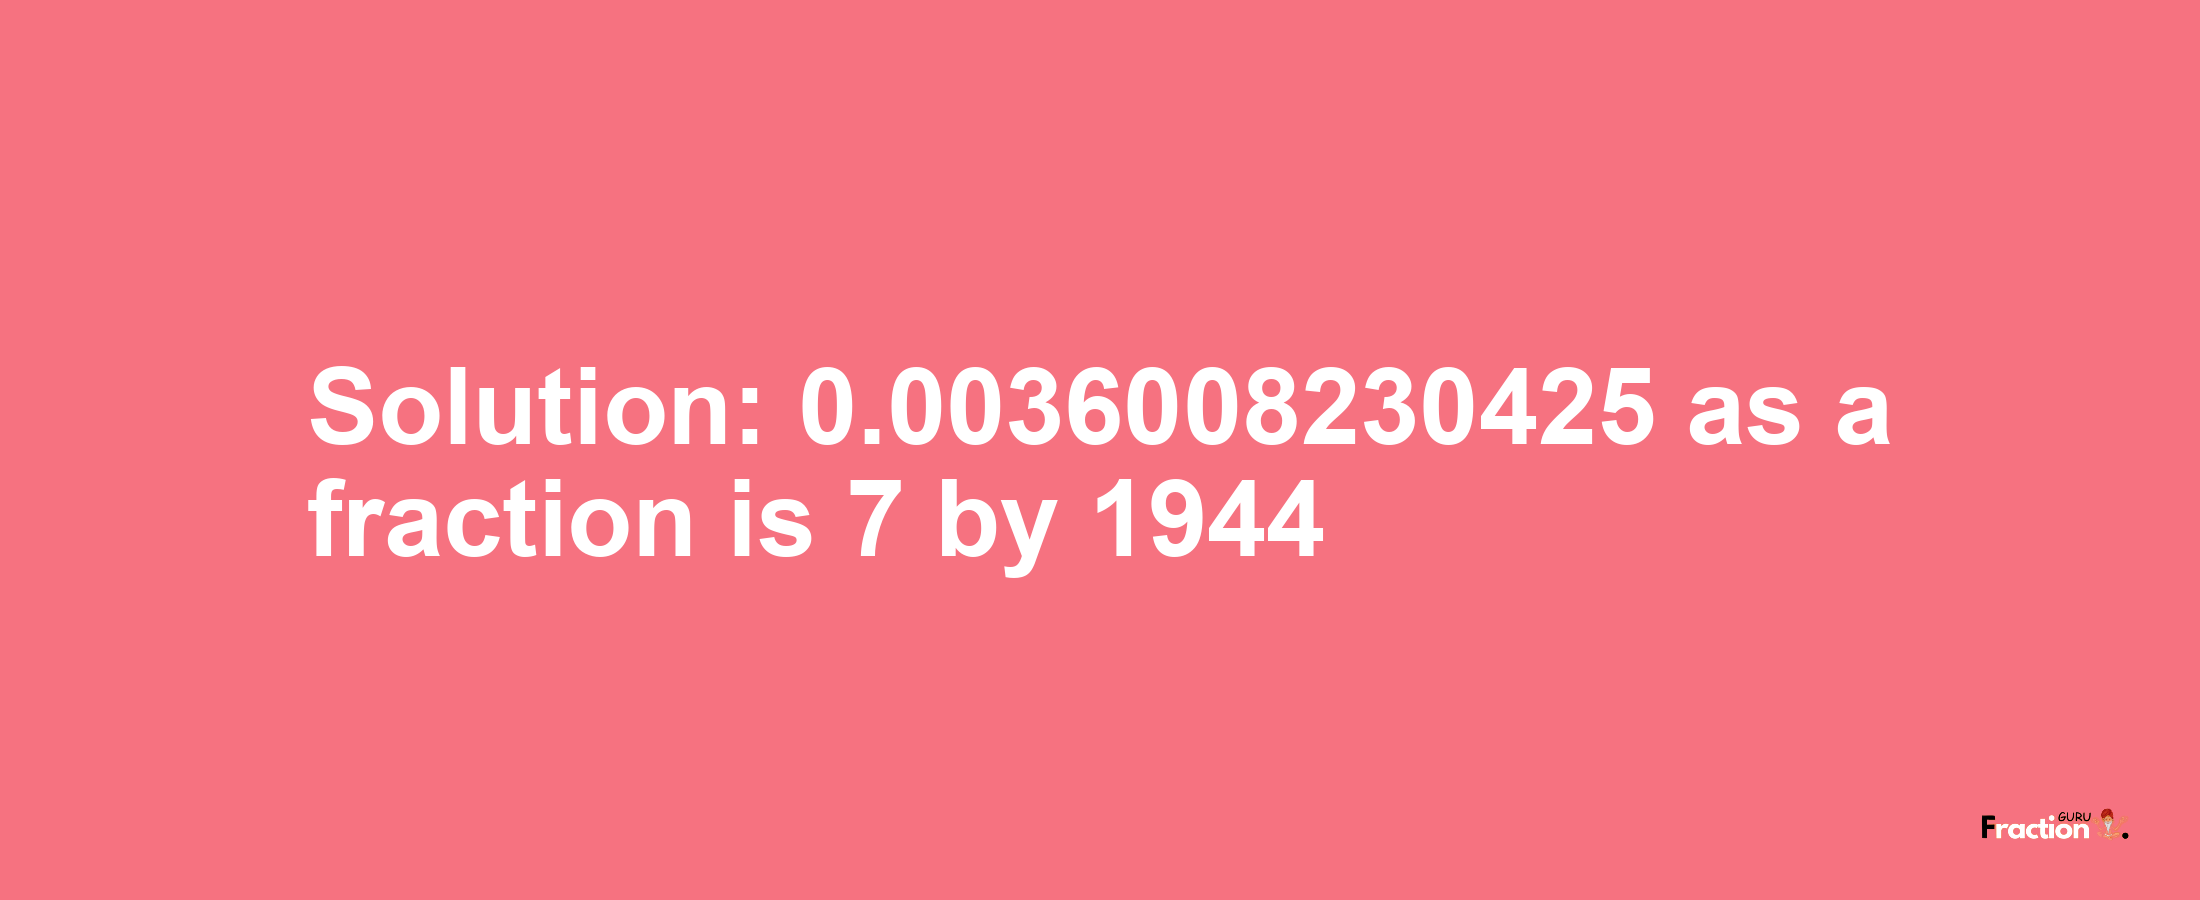 Solution:0.0036008230425 as a fraction is 7/1944